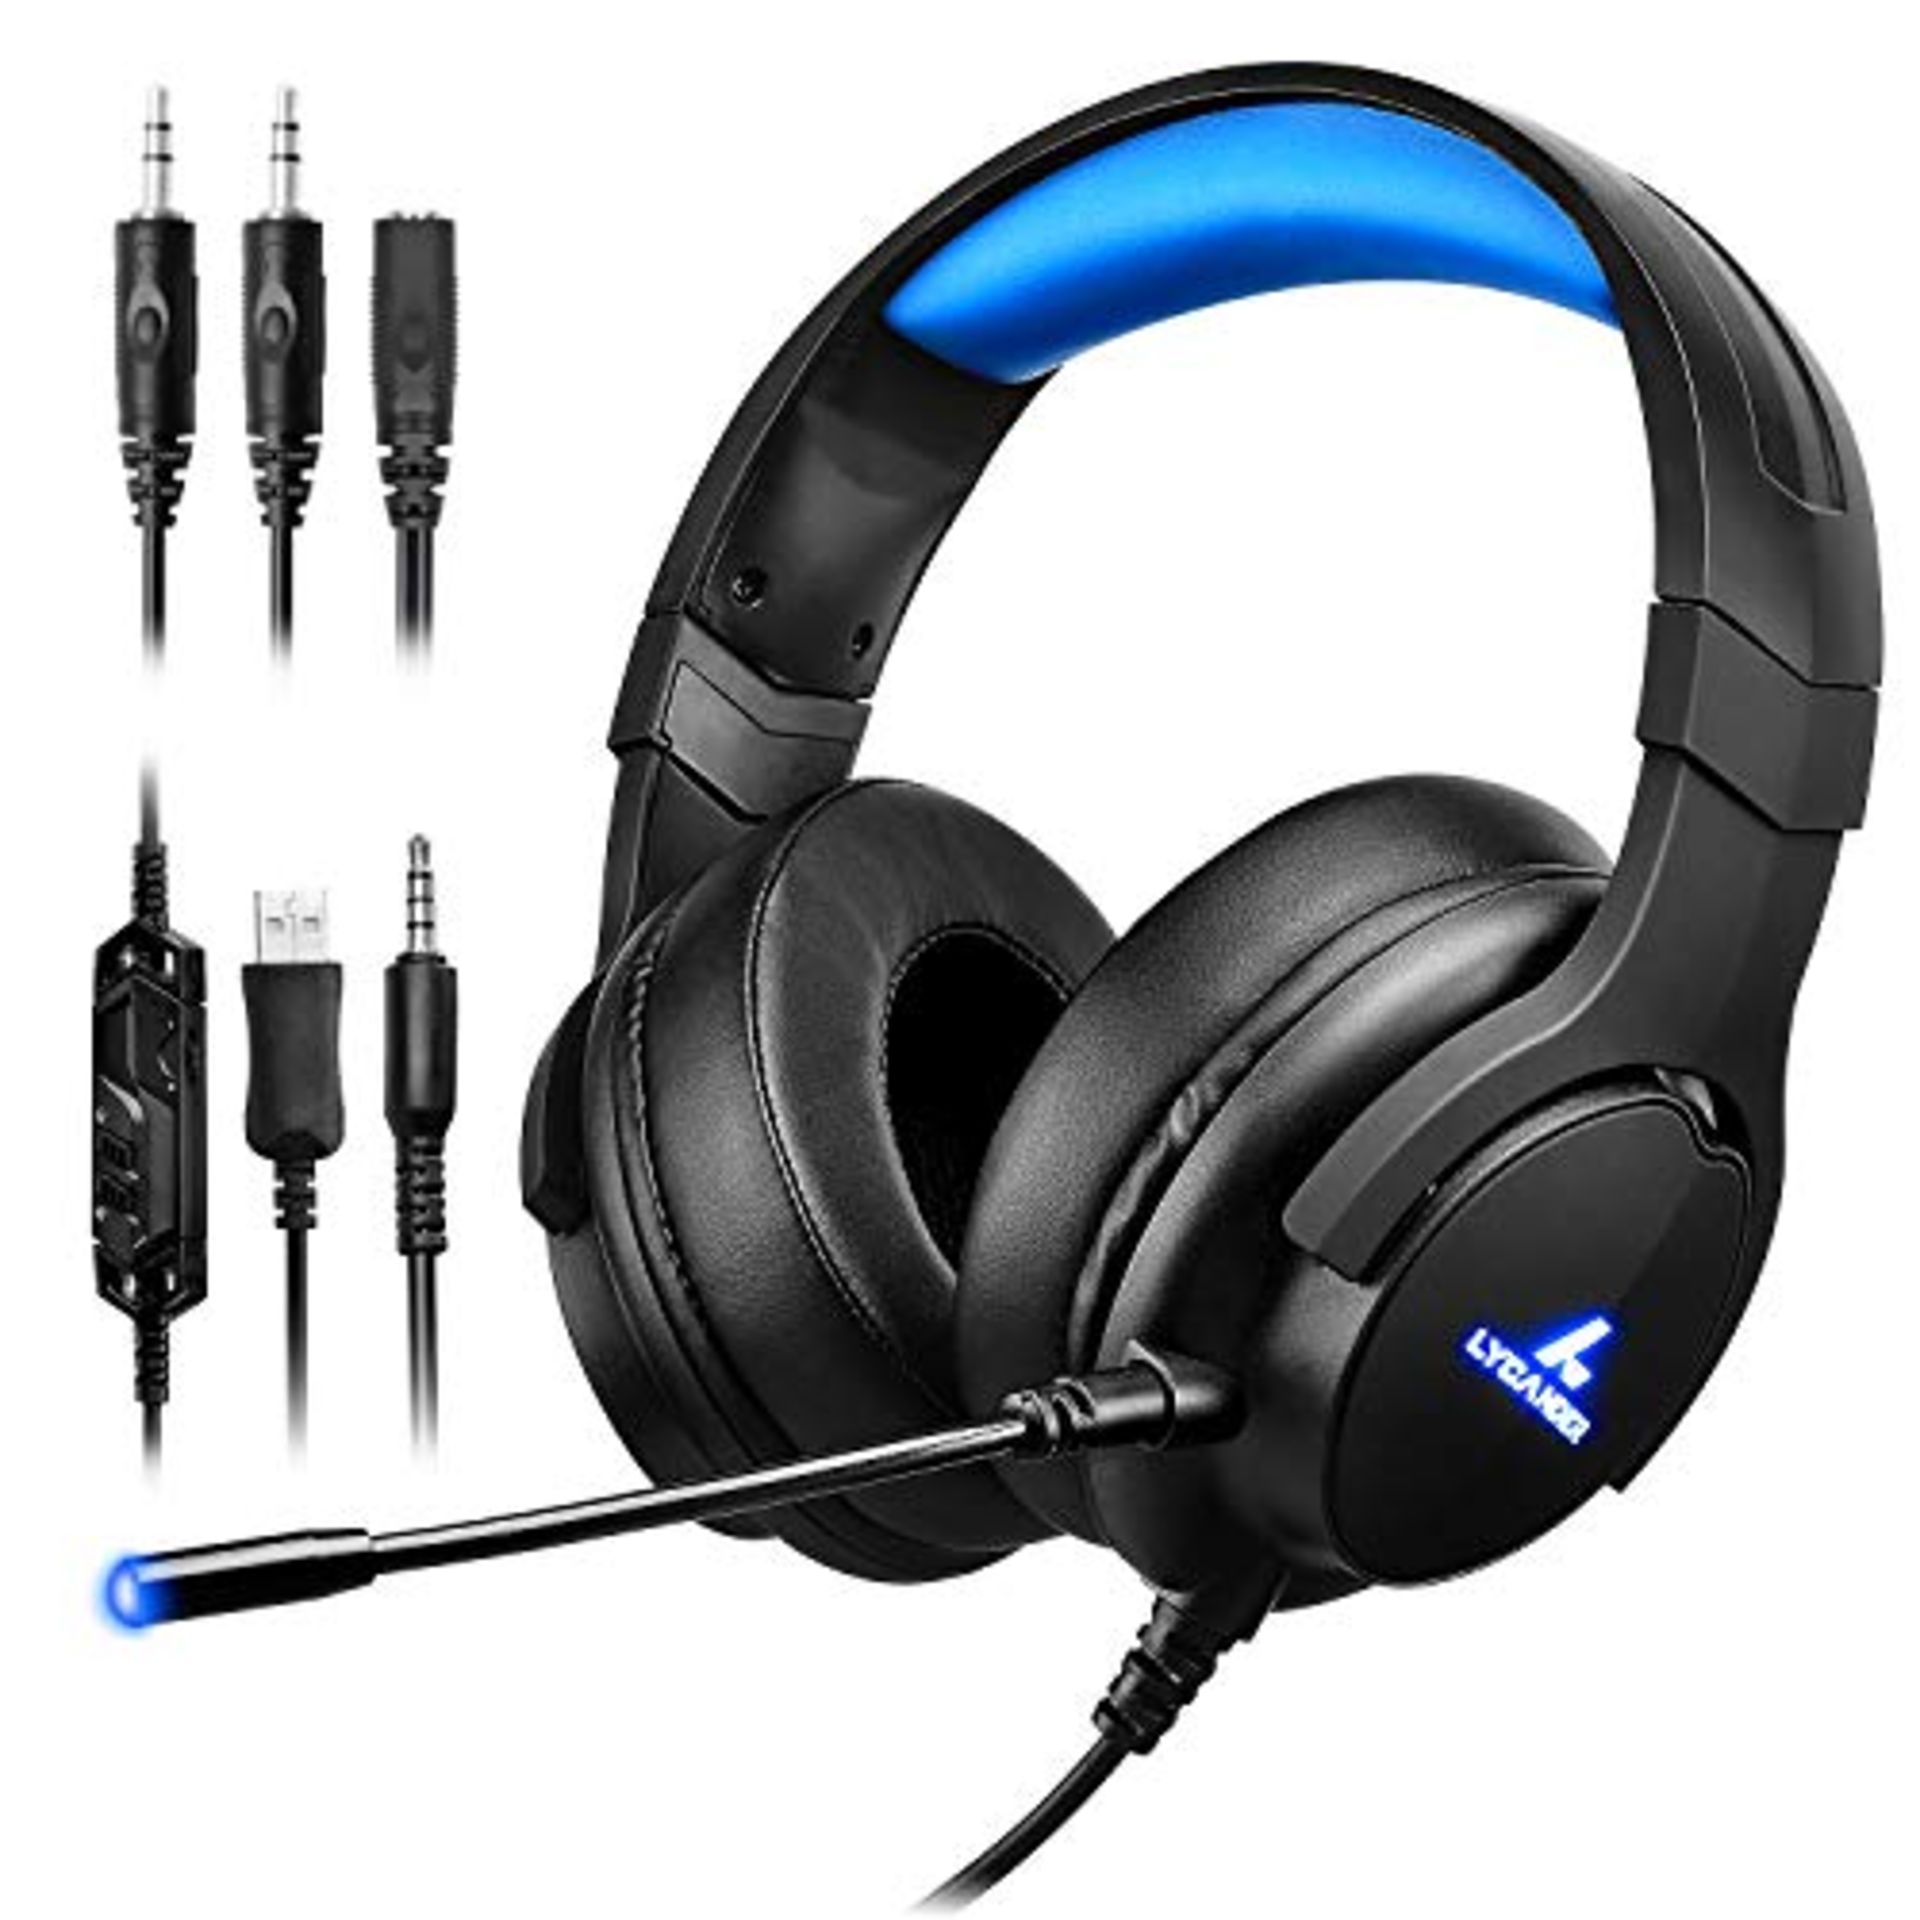 LYCANDER Gaming Headset with microphone and LED lights, 3.5mm input, for PC, PS4, Xbox